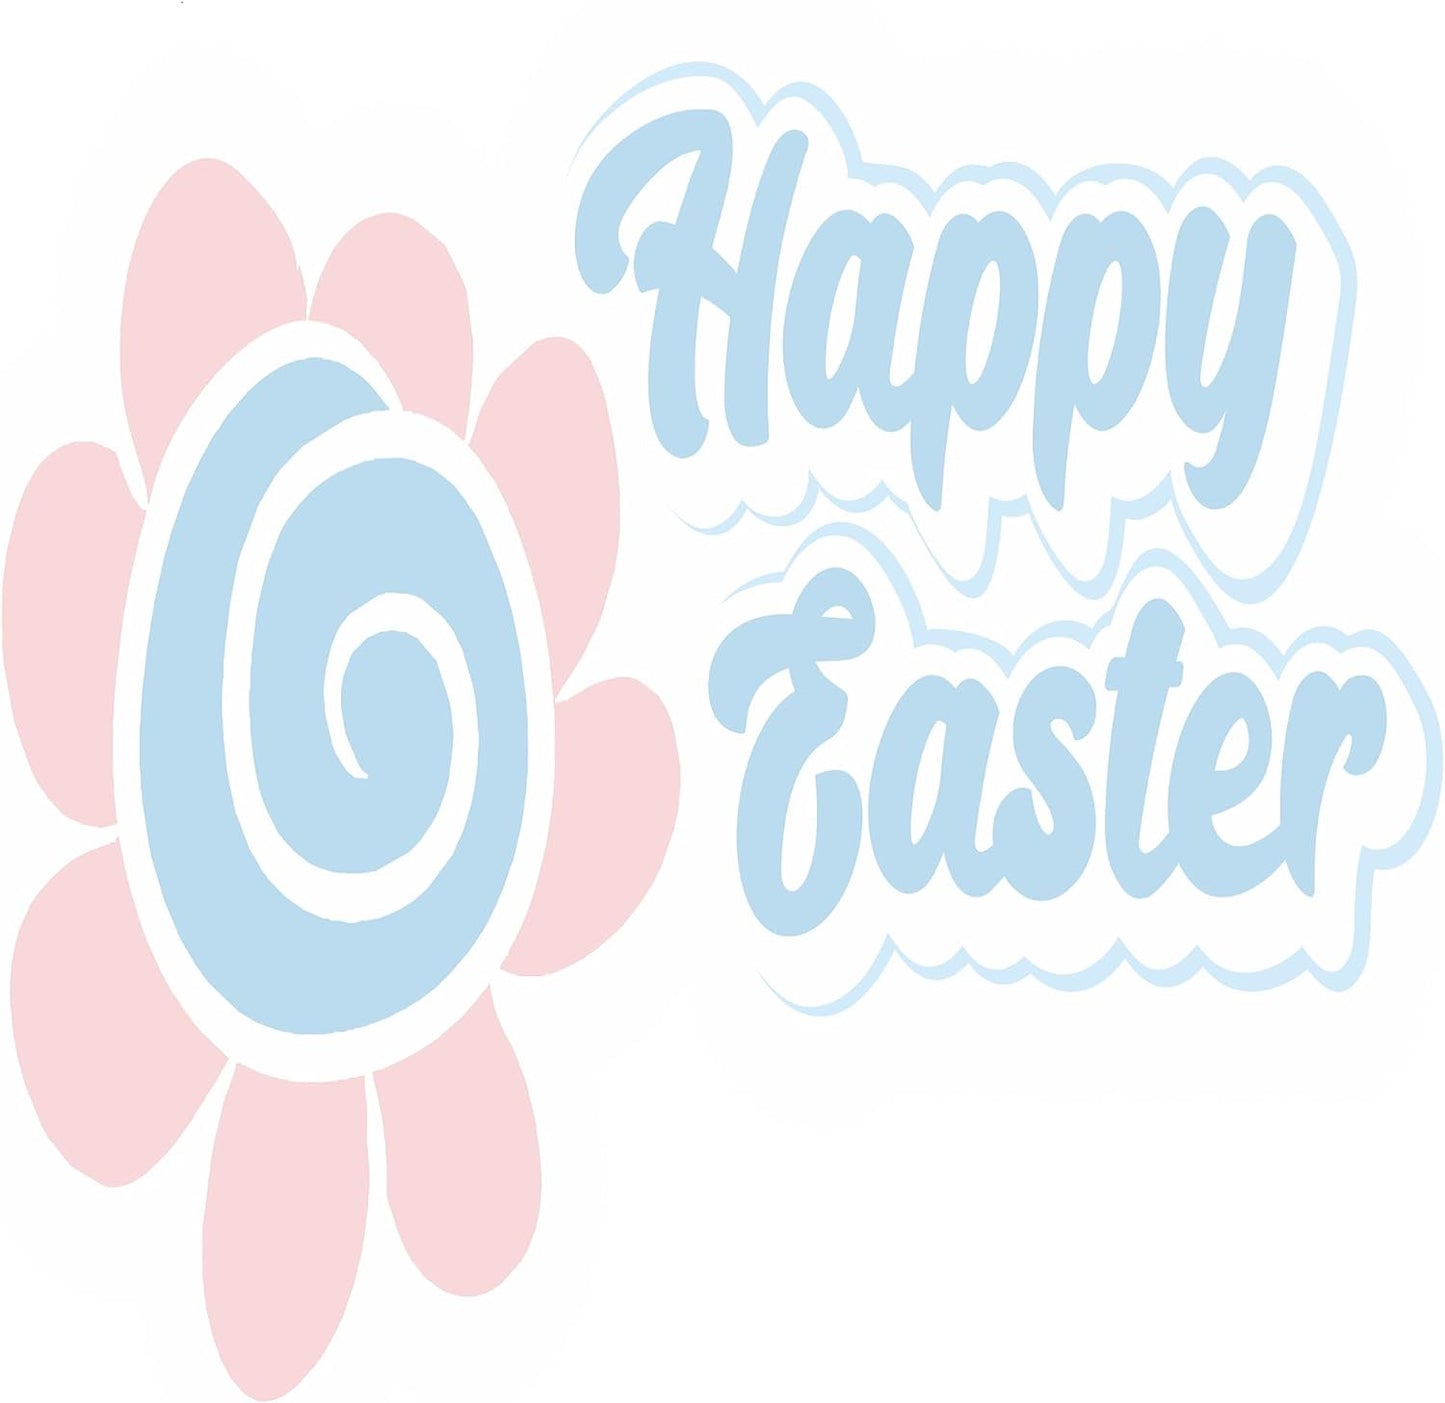 Inspirational Quote "Happy Easter" Motivational Sticker Vinyl Decal Motivation Stickers- 5" Vinyl Sticker Waterproof